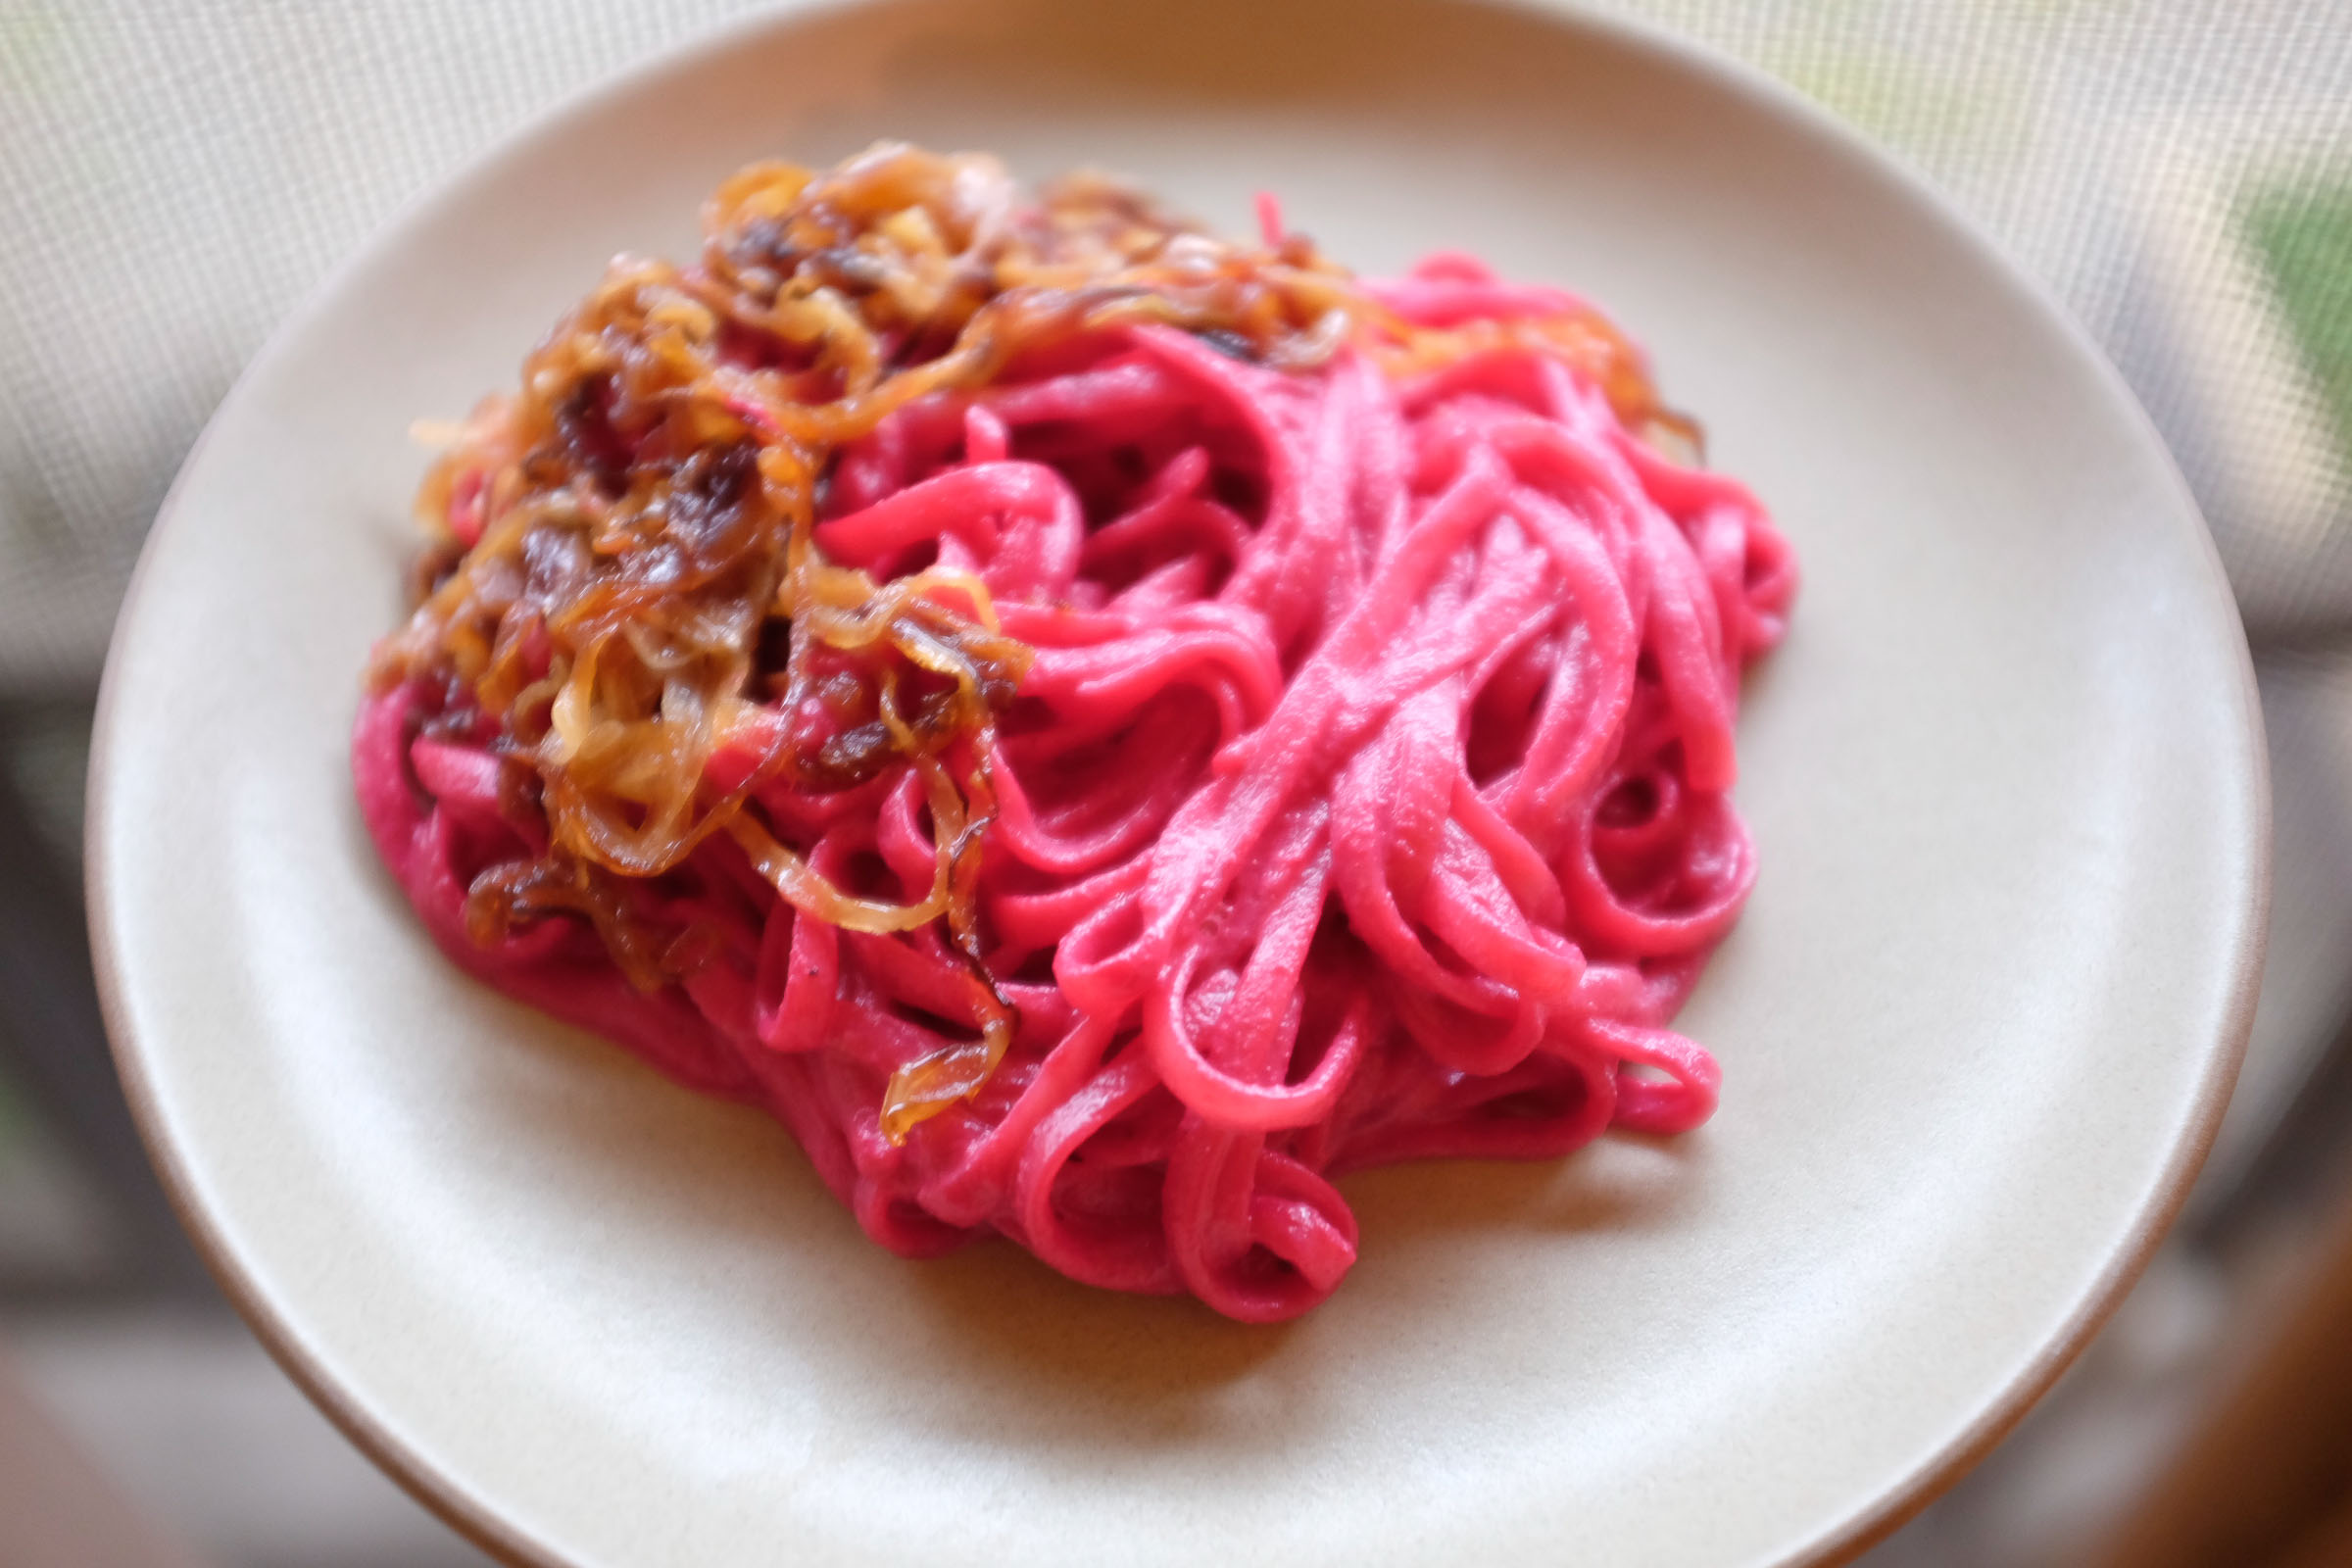 Linguine with Creamy Beet Sauce and Balsamic-Caramelized Onions